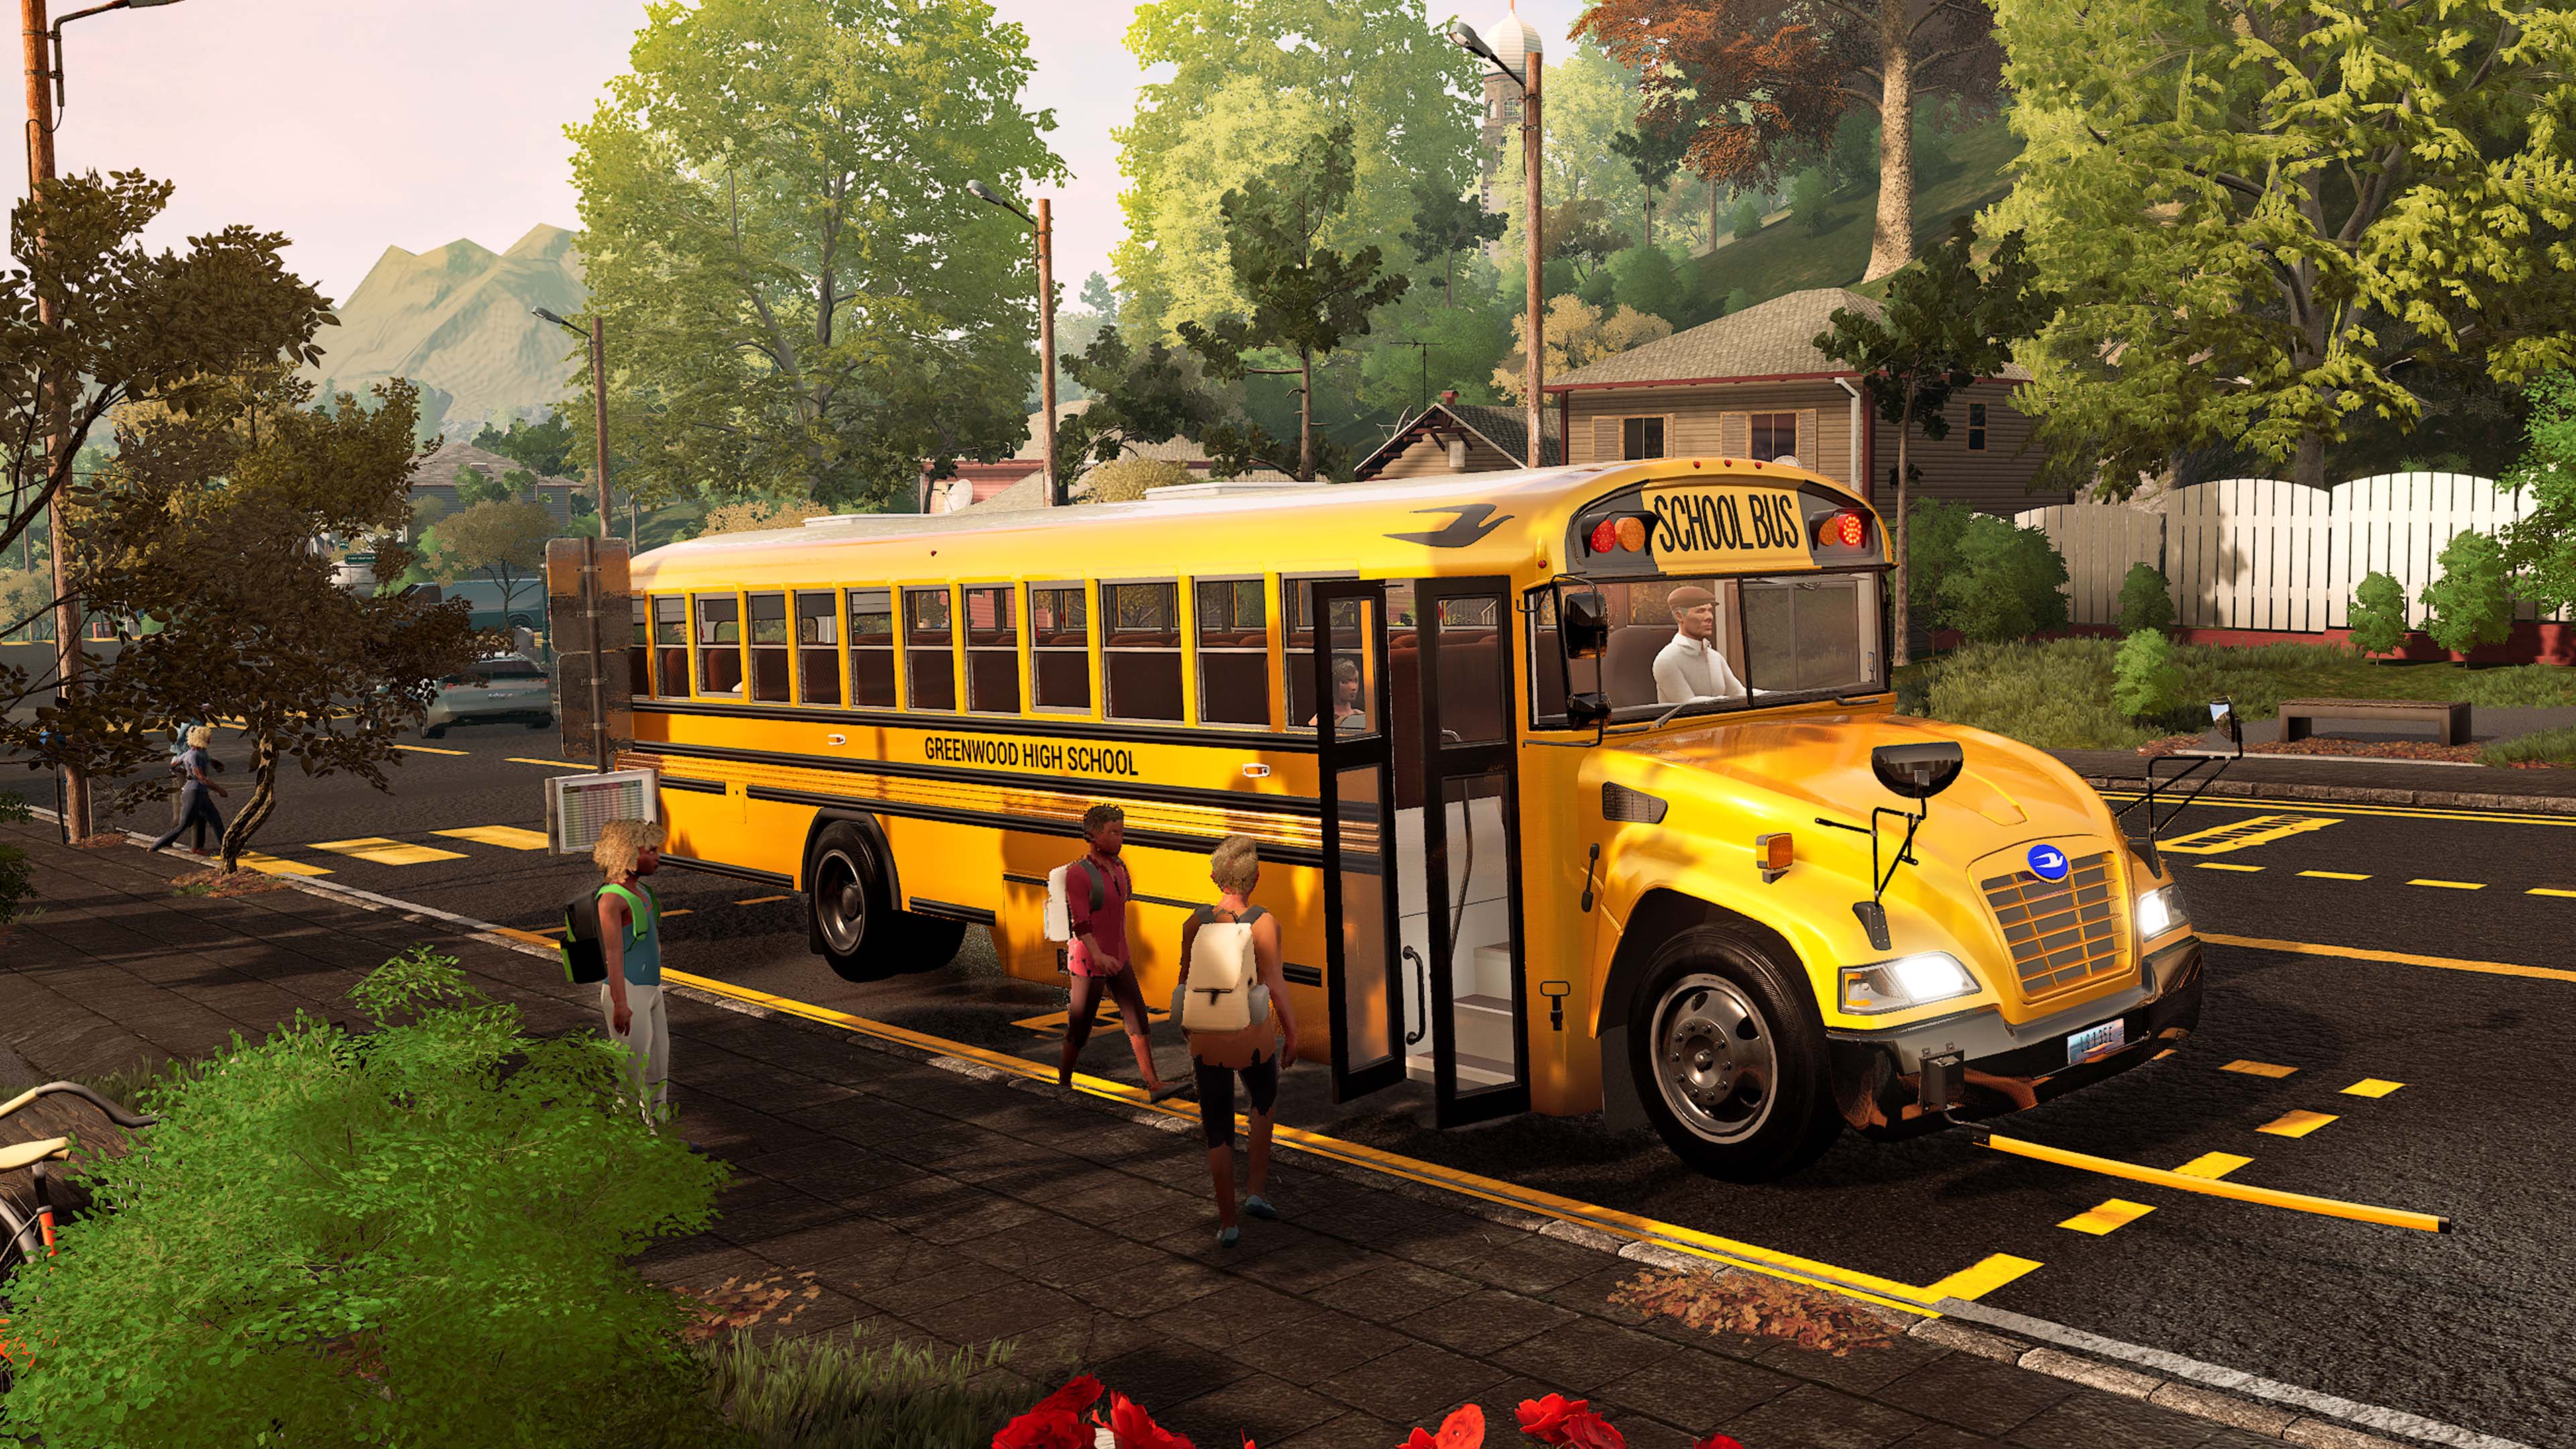 Bus Simulator on X: Bus Simulator 21 Next Stop joins the  𝐏𝐥𝐚𝐲𝐒𝐭𝐚𝐭𝐢𝐨𝐧 𝐏𝐥𝐮𝐬 𝐆𝐚𝐦𝐞 𝐂𝐚𝐭𝐚𝐥𝐨𝐠 on May 16! 🥳 For  subscribers of PS Plus Premium & Extra, the game will be available